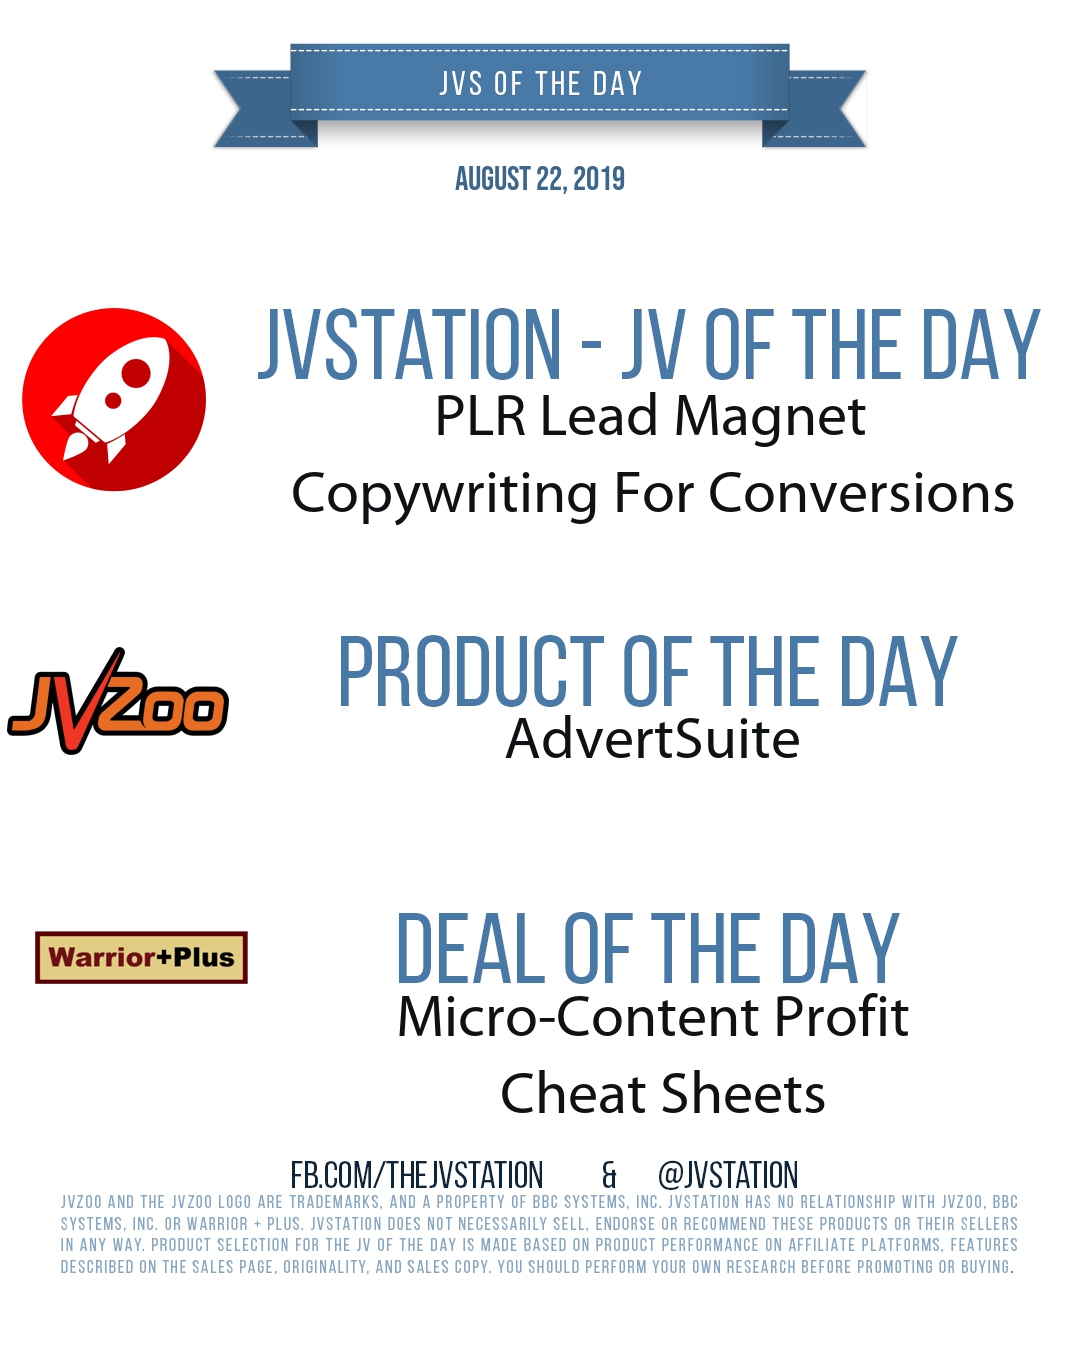 JVs of the day - August 22, 2019